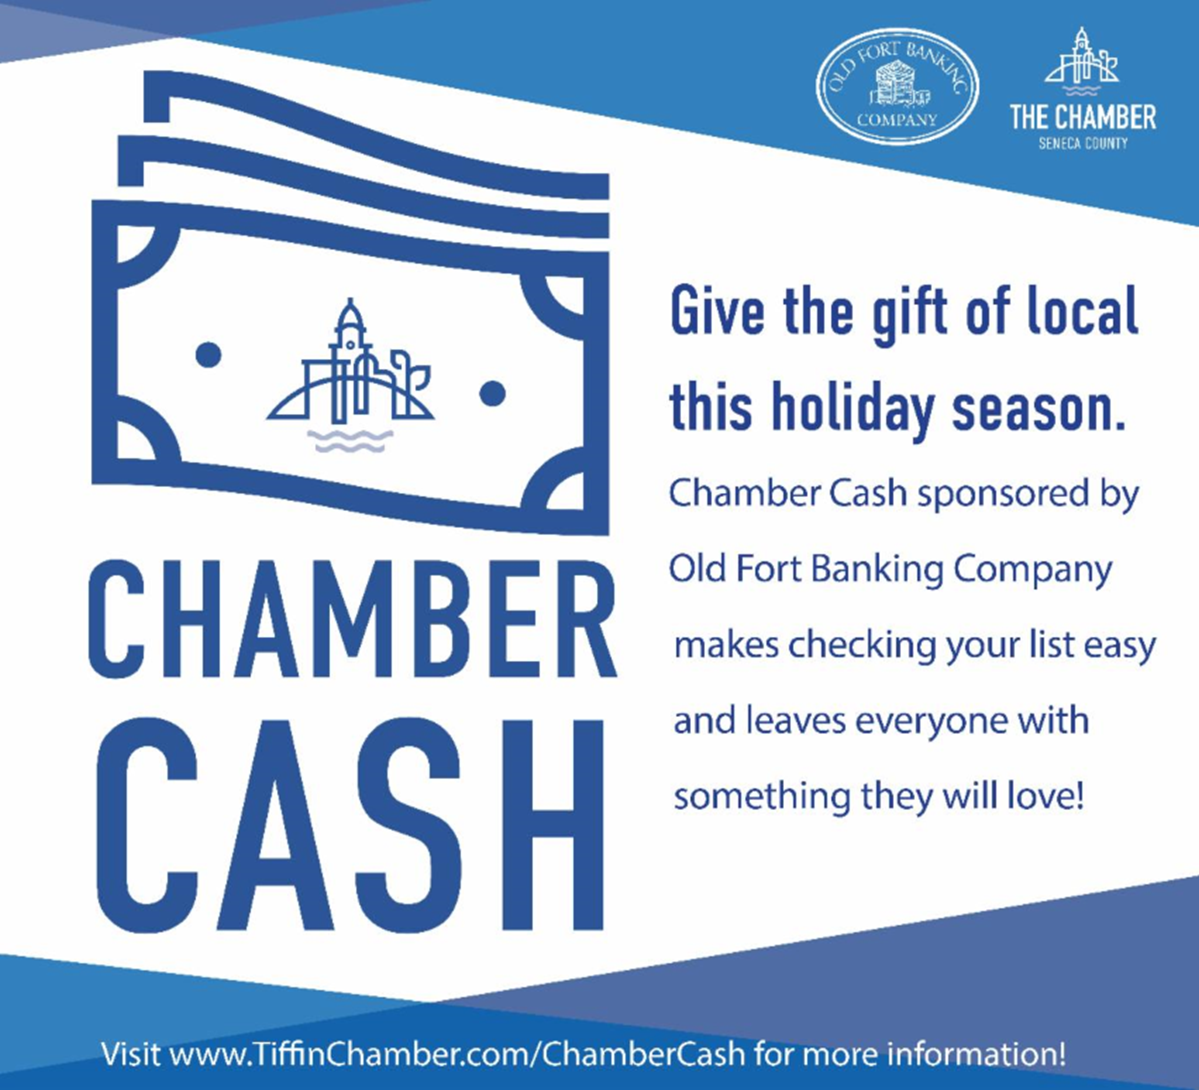 Chamber Cash for this Season of Giving!